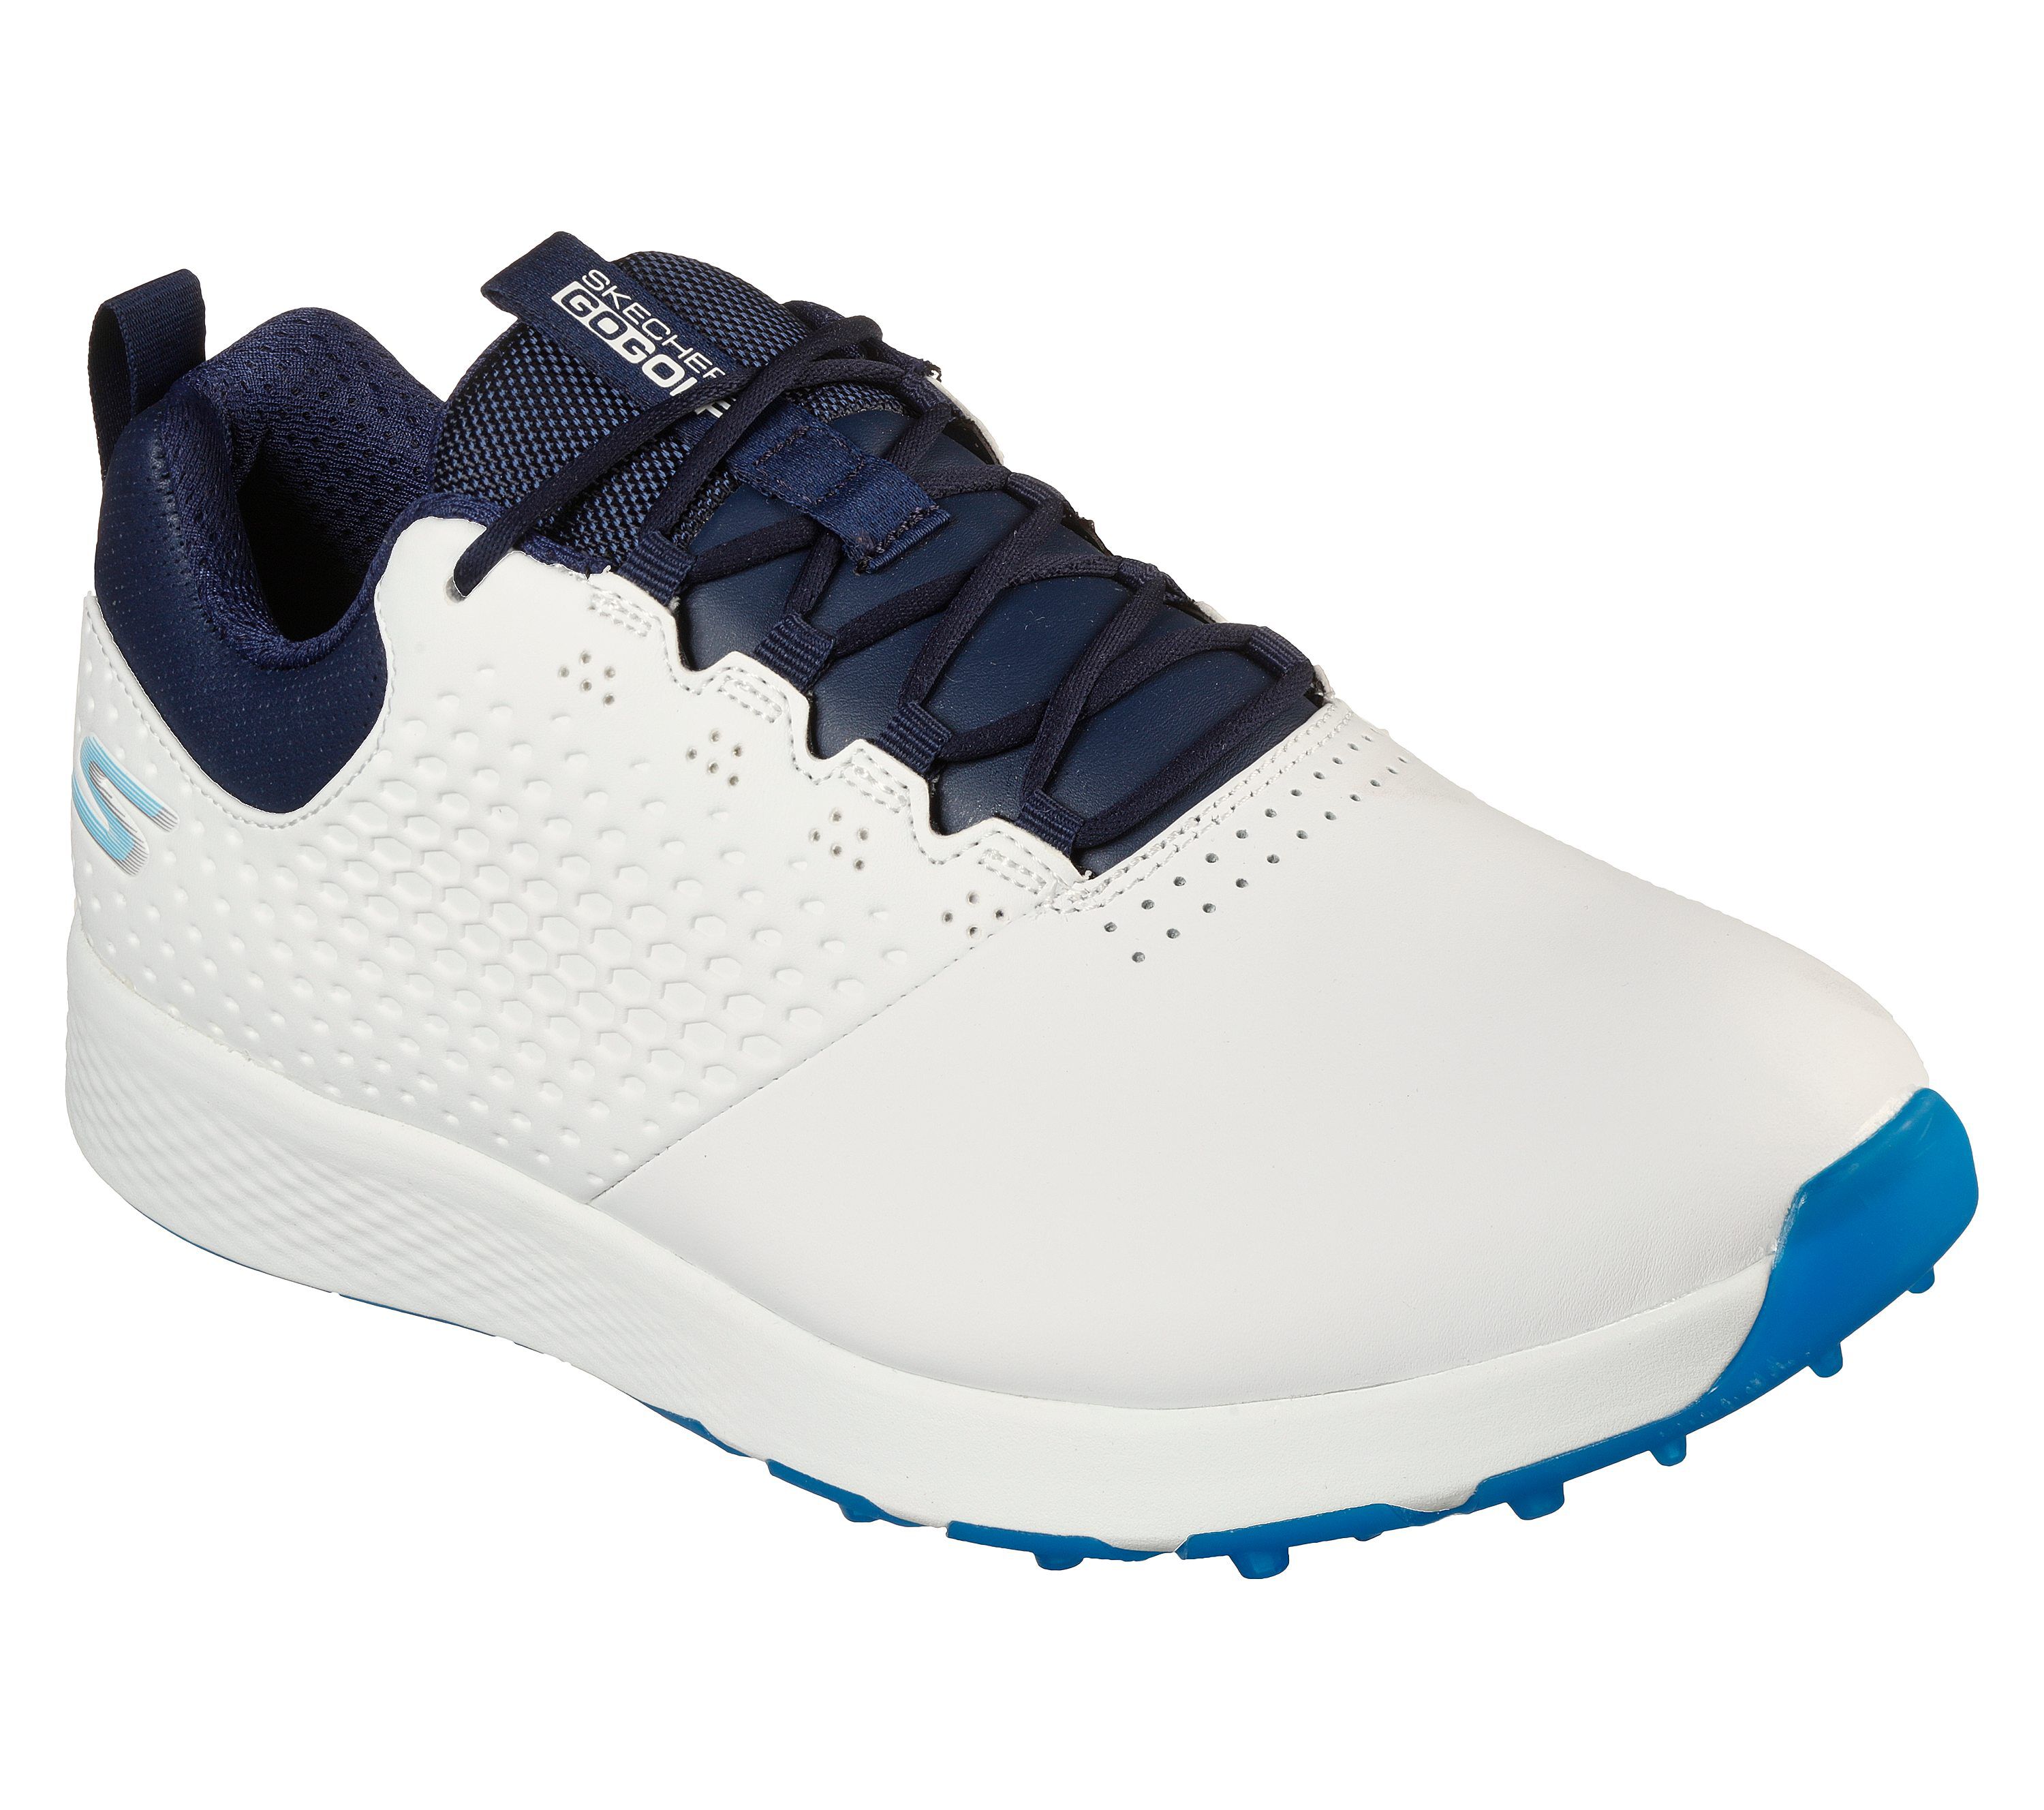 skechers extra wide mens golf shoes